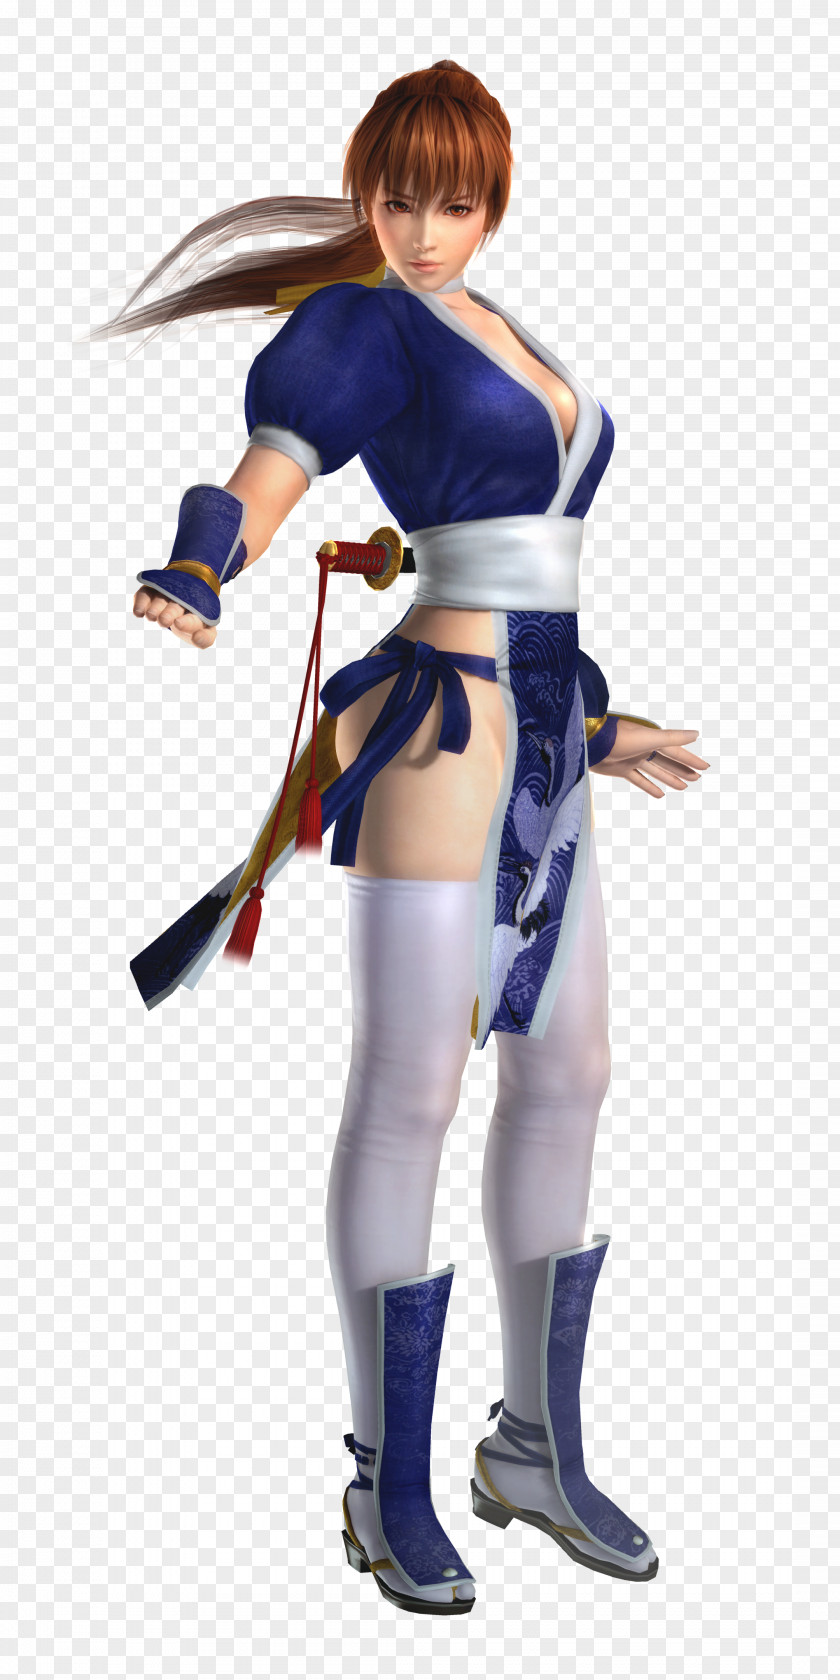 Dead Or Alive 5 Ultimate Ninja Gaiden 3 Kasumi PNG or Kasumi, cg clipart PNG